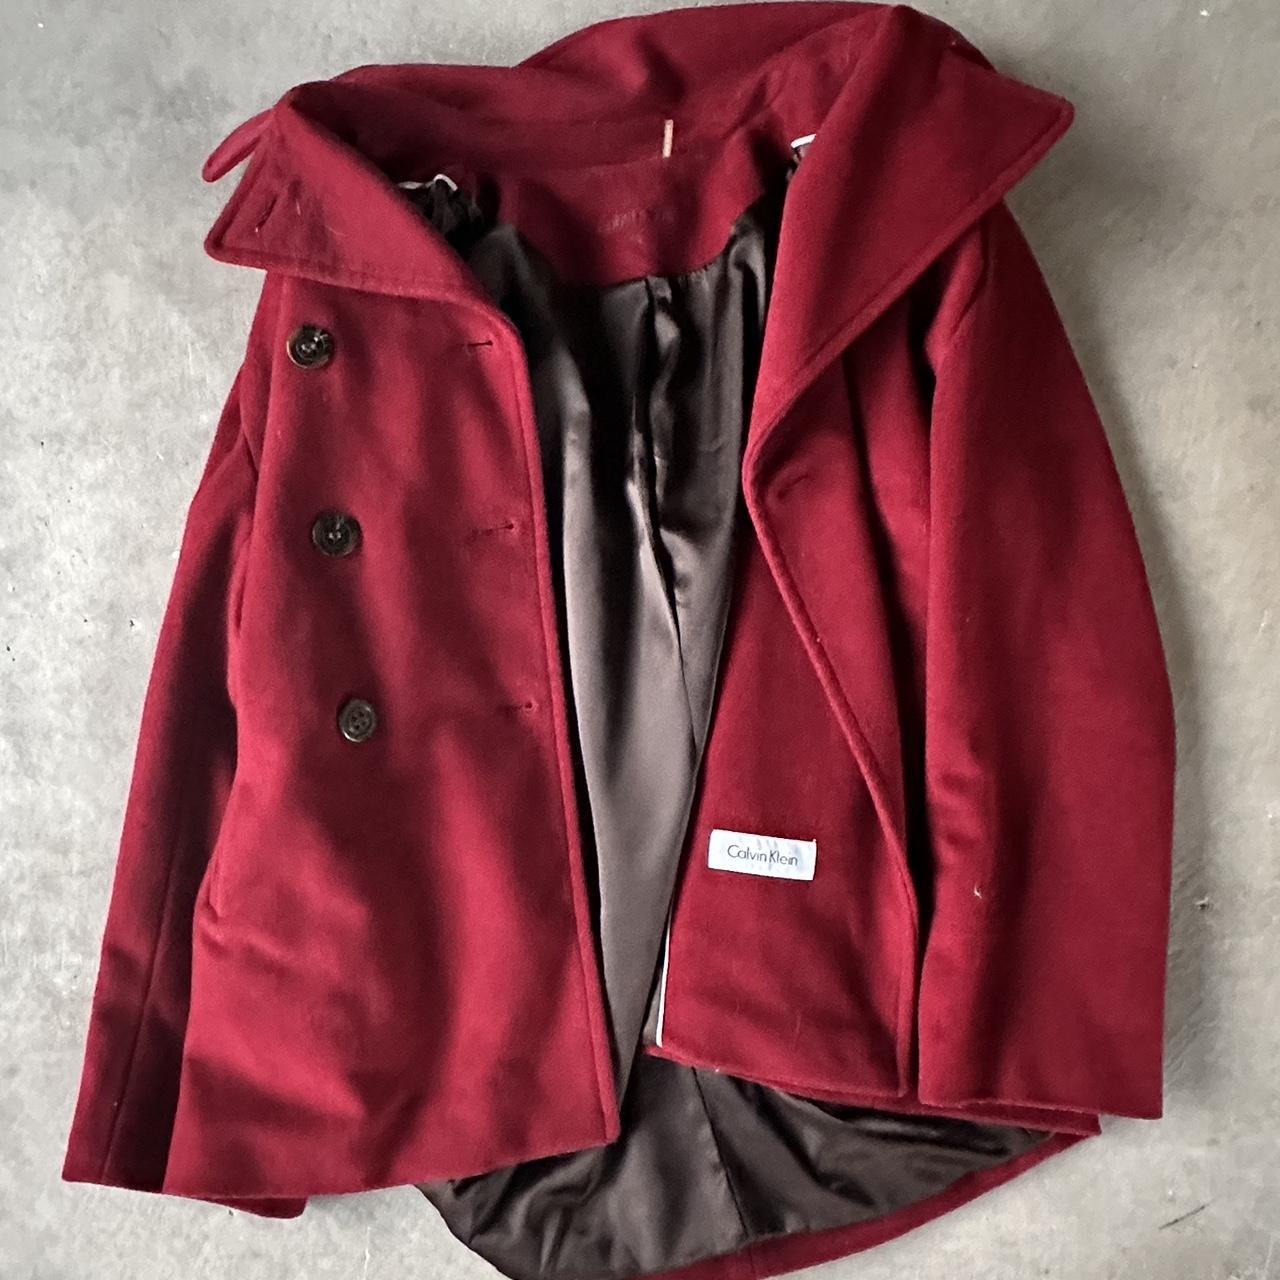 Calvin Klein Coat For Women Extremely Nice Red... - Depop